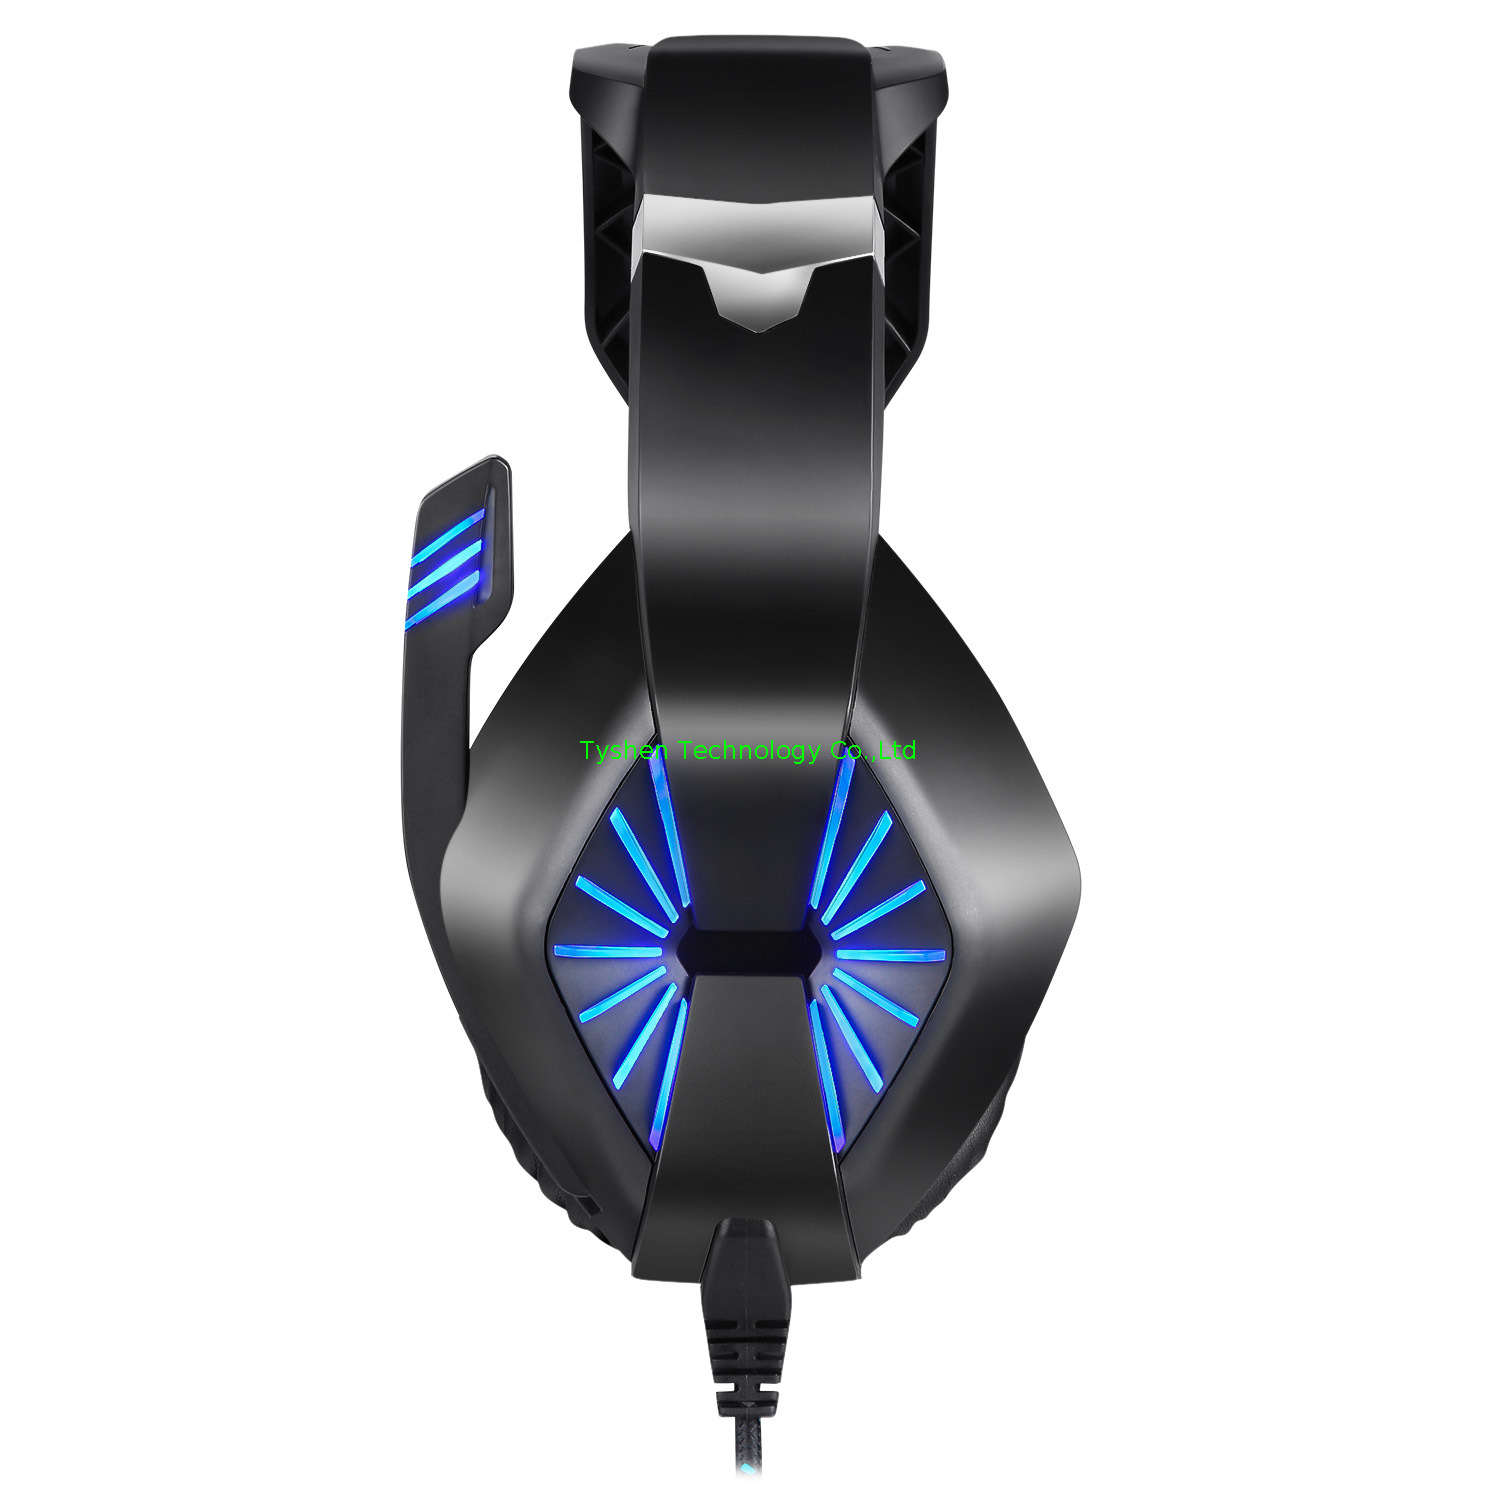 Computer Gaming Headset with USB and 3.5 Audio Port, 7 Color Lighting